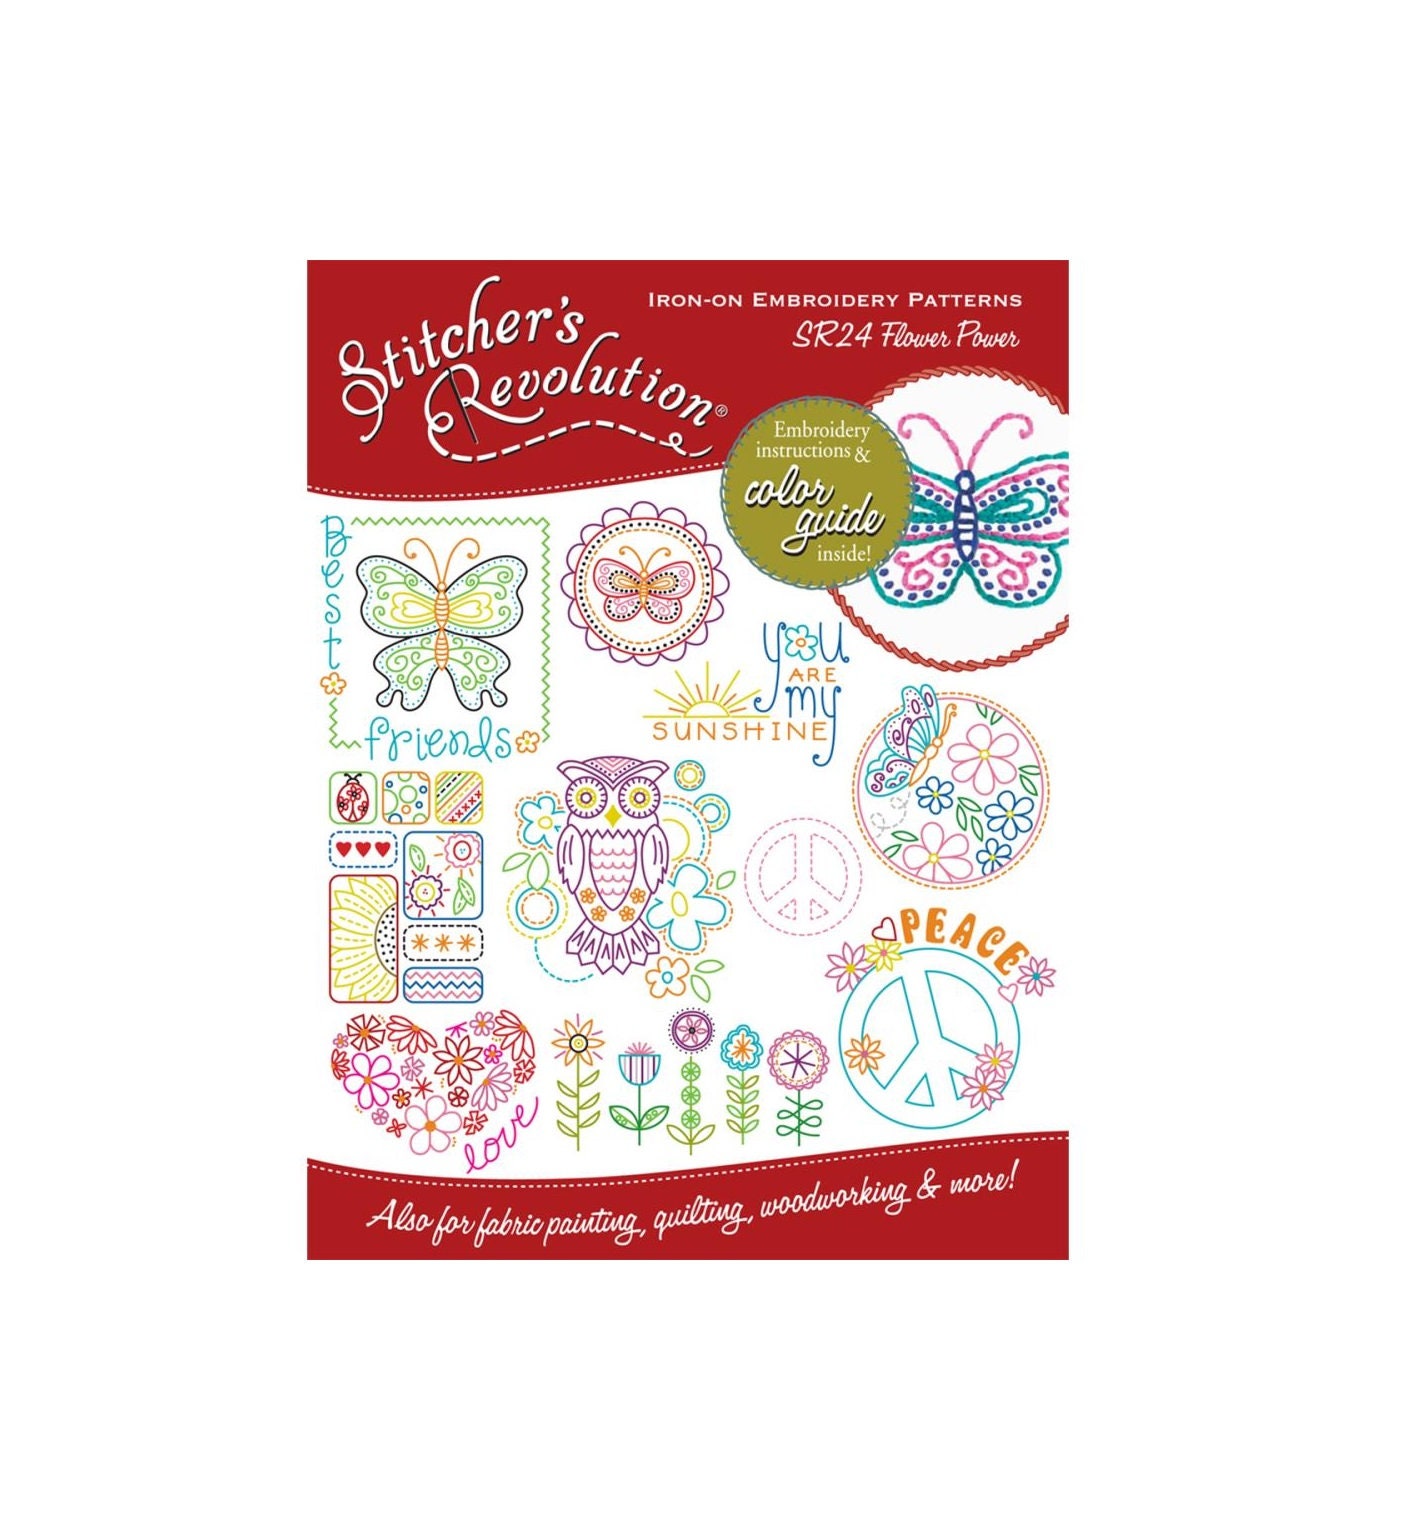 Clearance FLOWER POWER SR24, Modern Linens SR19 or Combo of 2 Stitchers  Revolution Iron on Embroidery Pattern, Discounted Combos, Ships Fast 